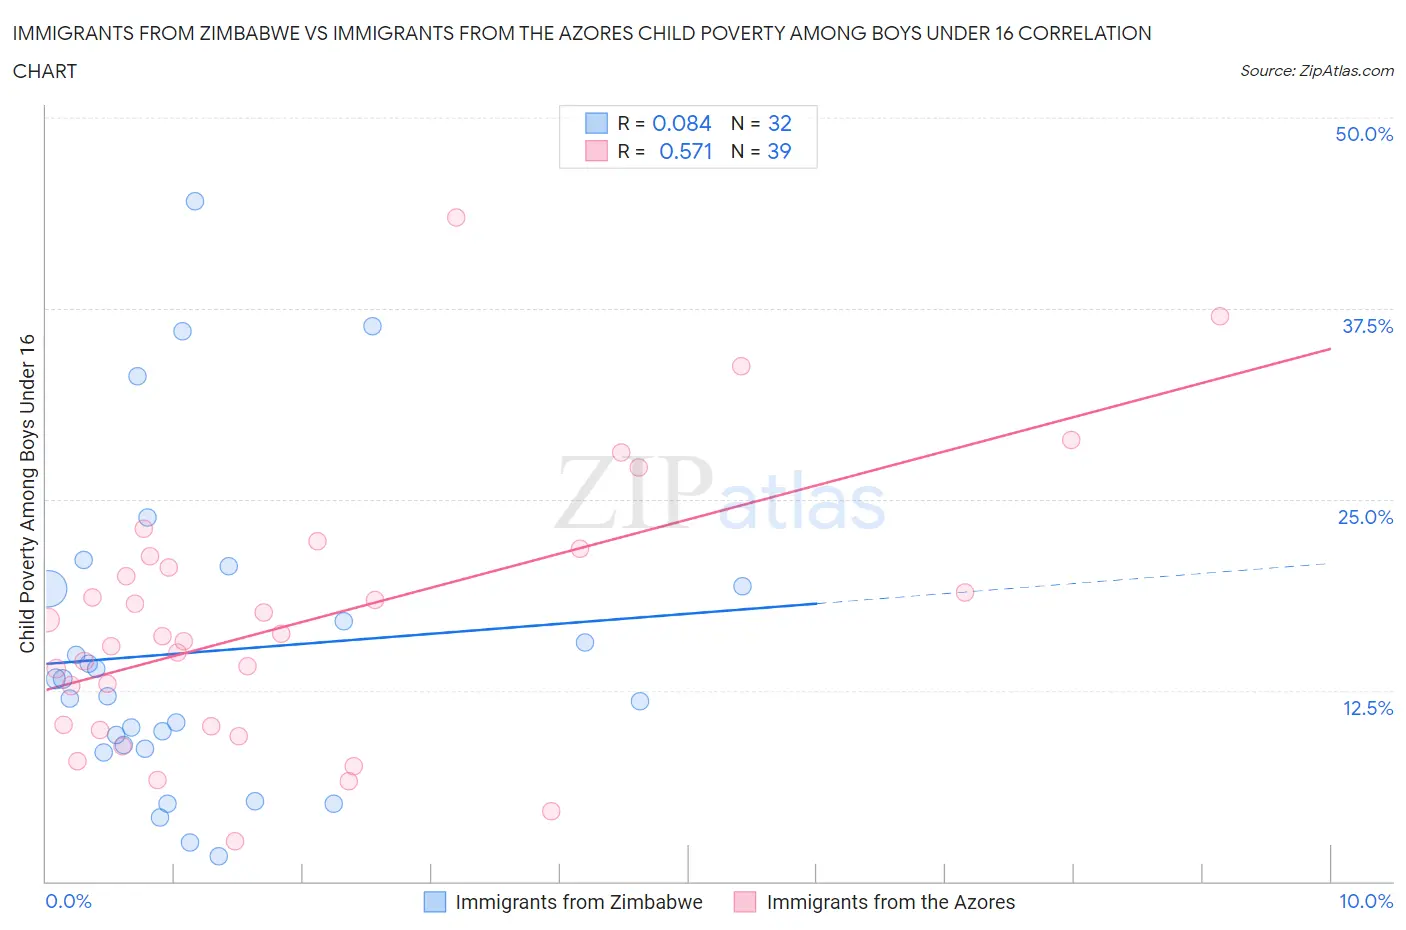 Immigrants from Zimbabwe vs Immigrants from the Azores Child Poverty Among Boys Under 16